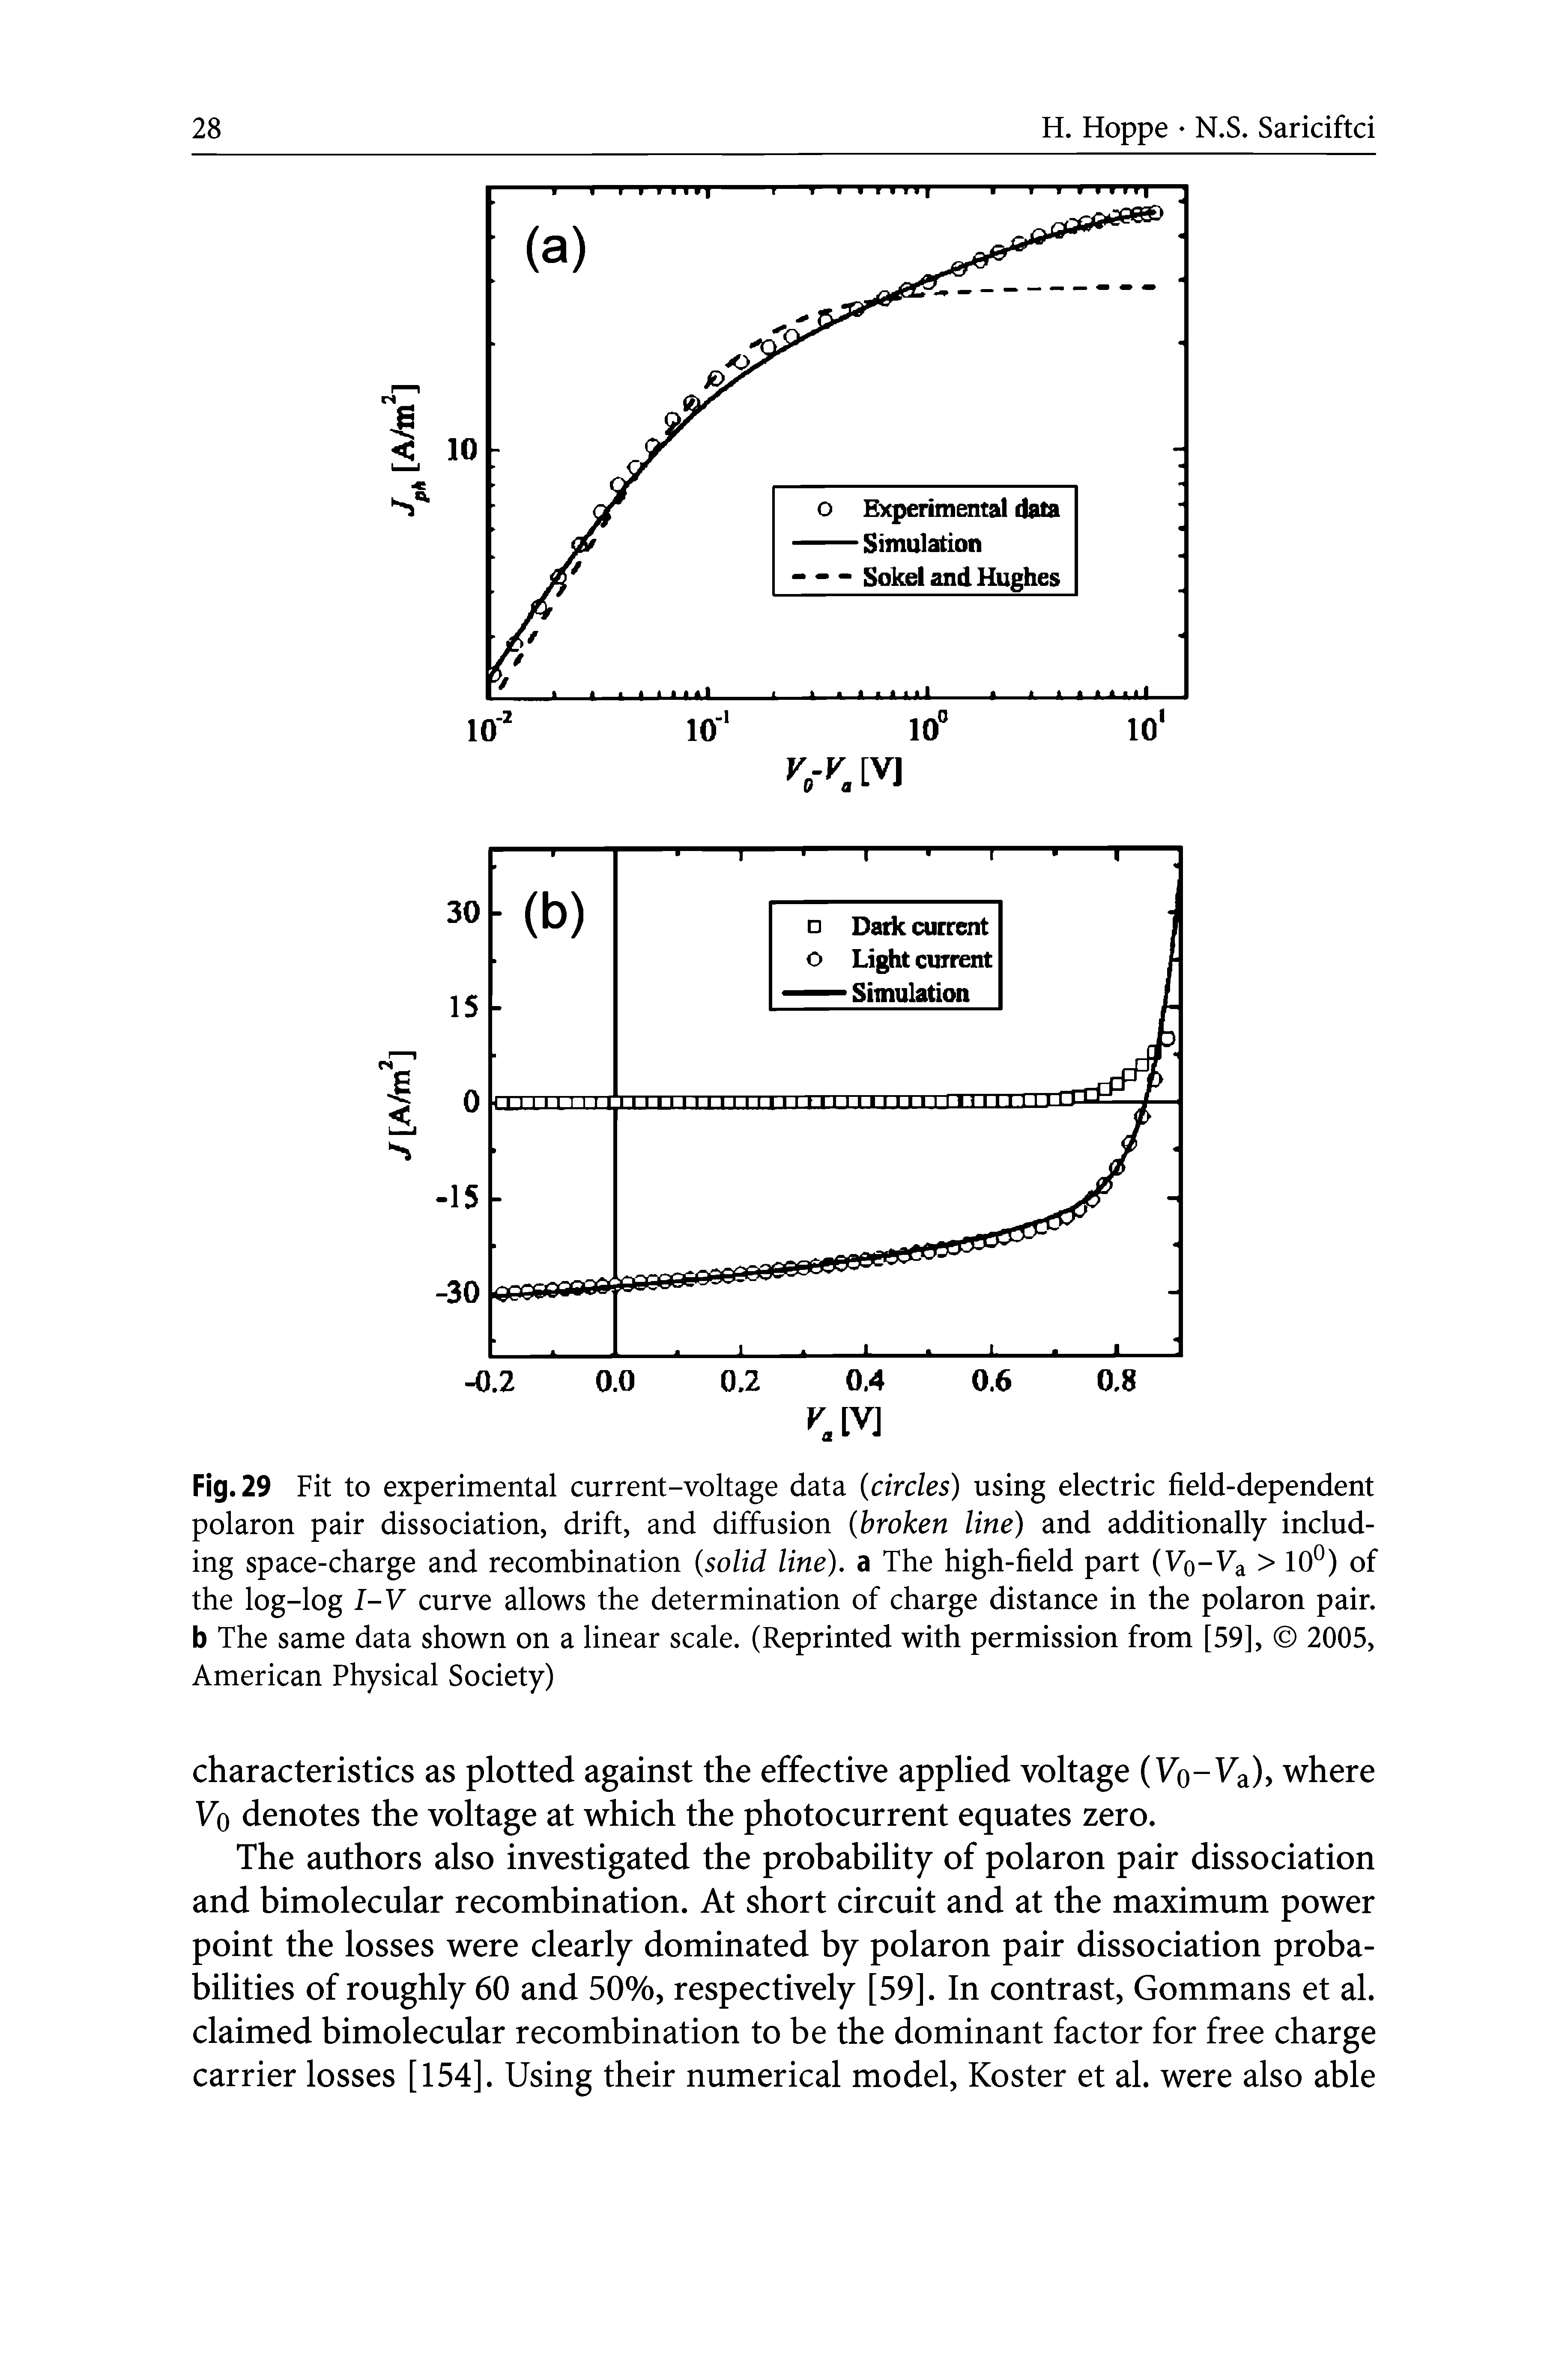 Fig. 29 Fit to experimental current-voltage data circles) using electric field-dependent polaron pair dissociation, drift, and diffusion broken line) and additionally including space-charge and recombination solid line), a The high-field part (Vo- a > 10°) of the log-log I-V curve allows the determination of charge distance in the polaron pair, b The same data shown on a linear scale. (Reprinted with permission from [59], 2005, American Physical Society)...